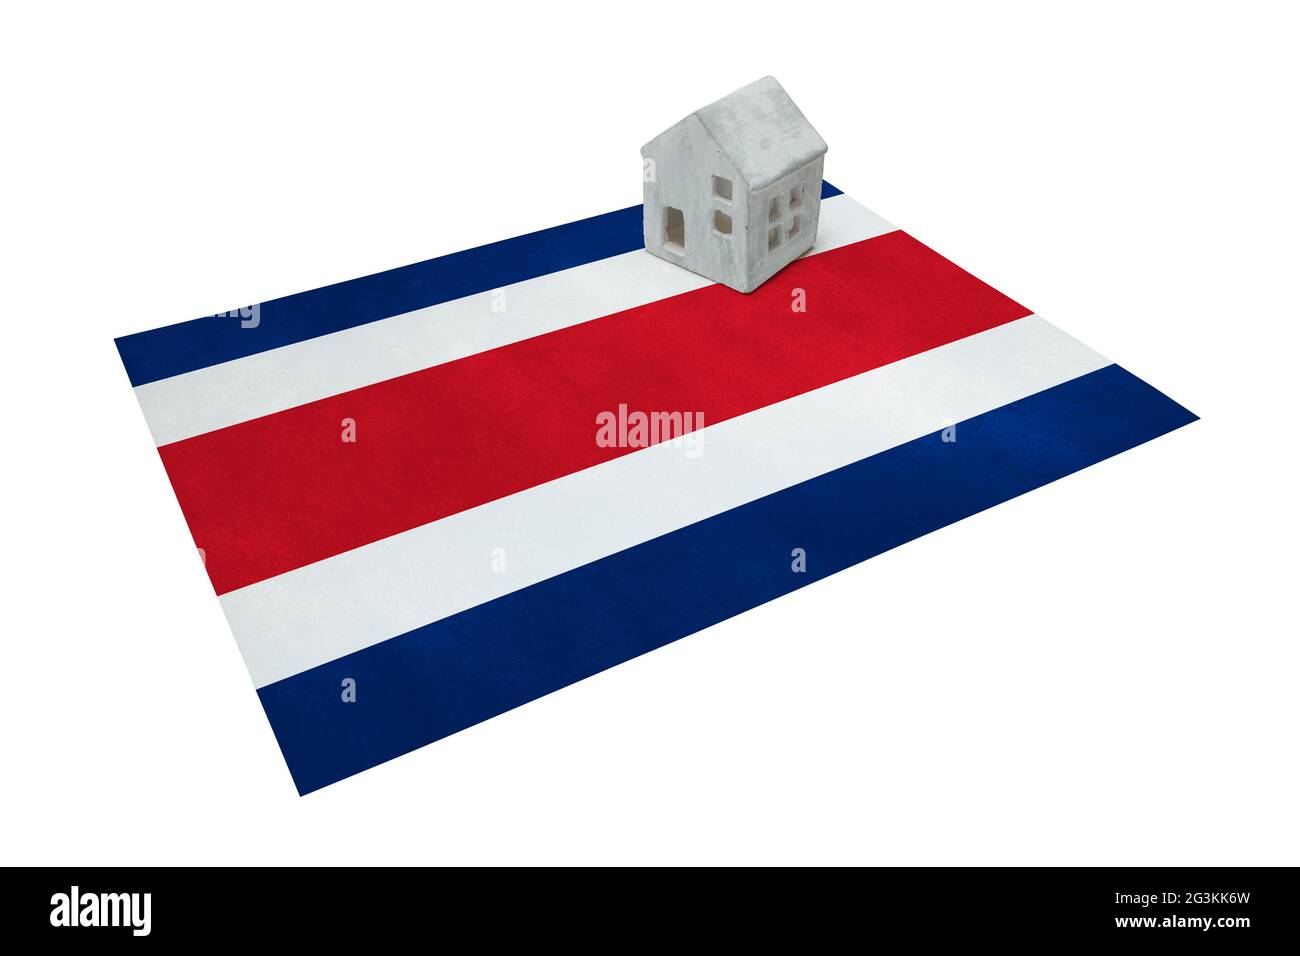 Small house on a flag - Costa Rica Stock Photo